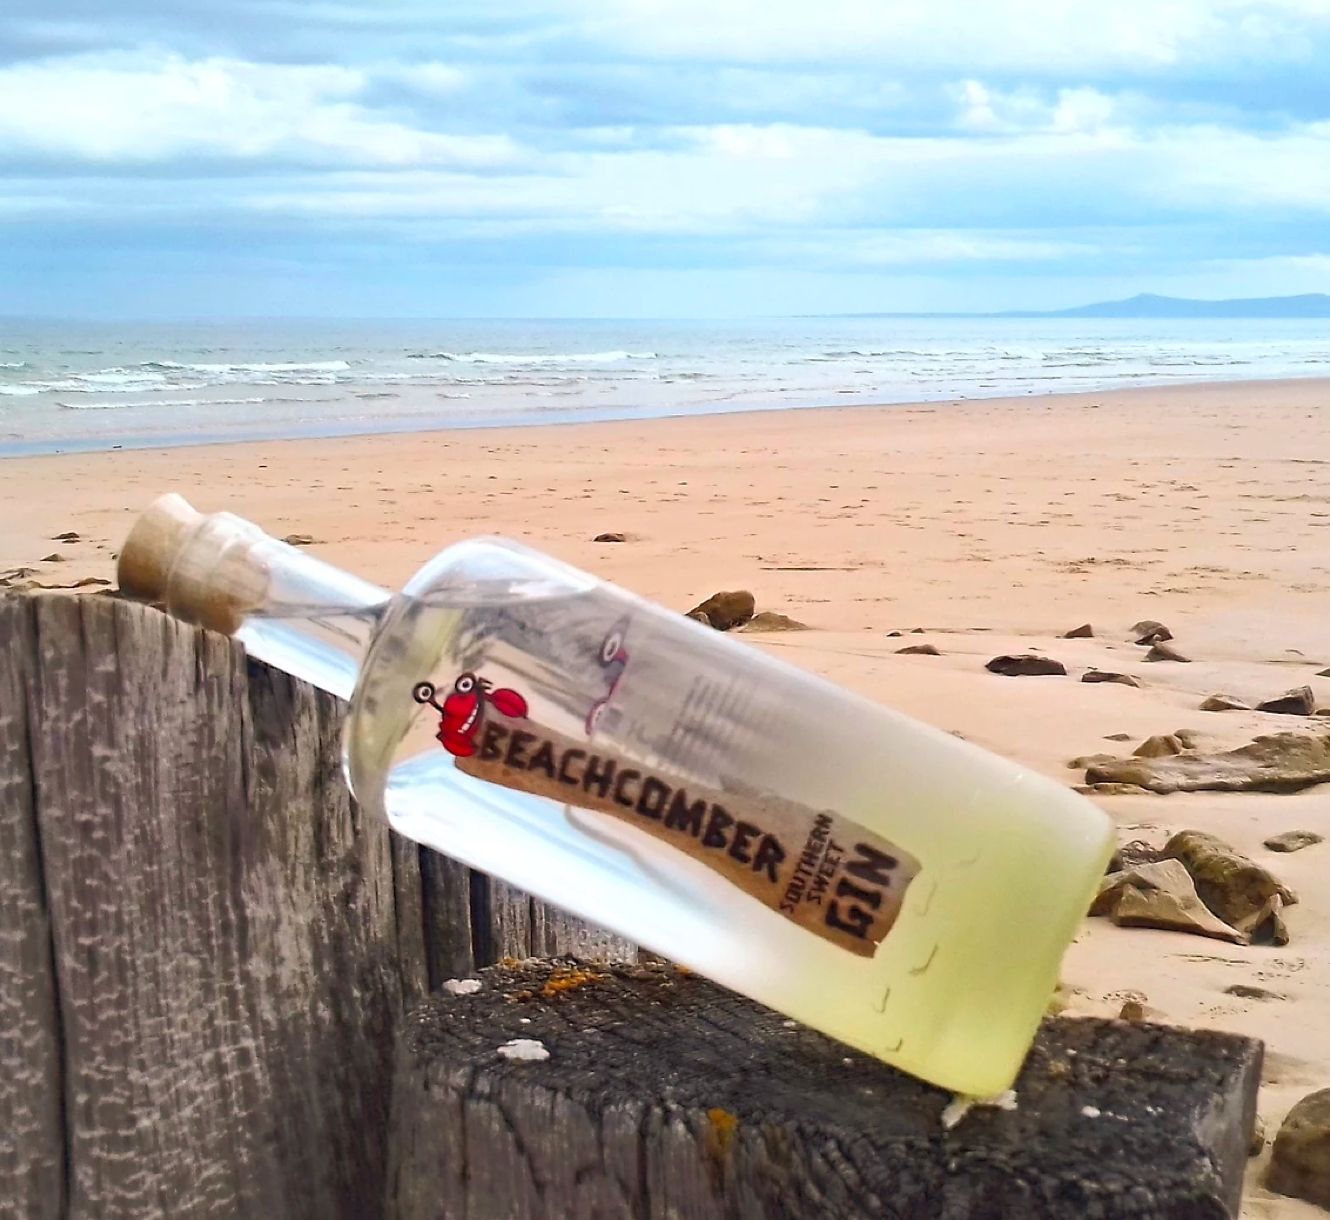 Locally sourced gin from Beachcomber Gin.